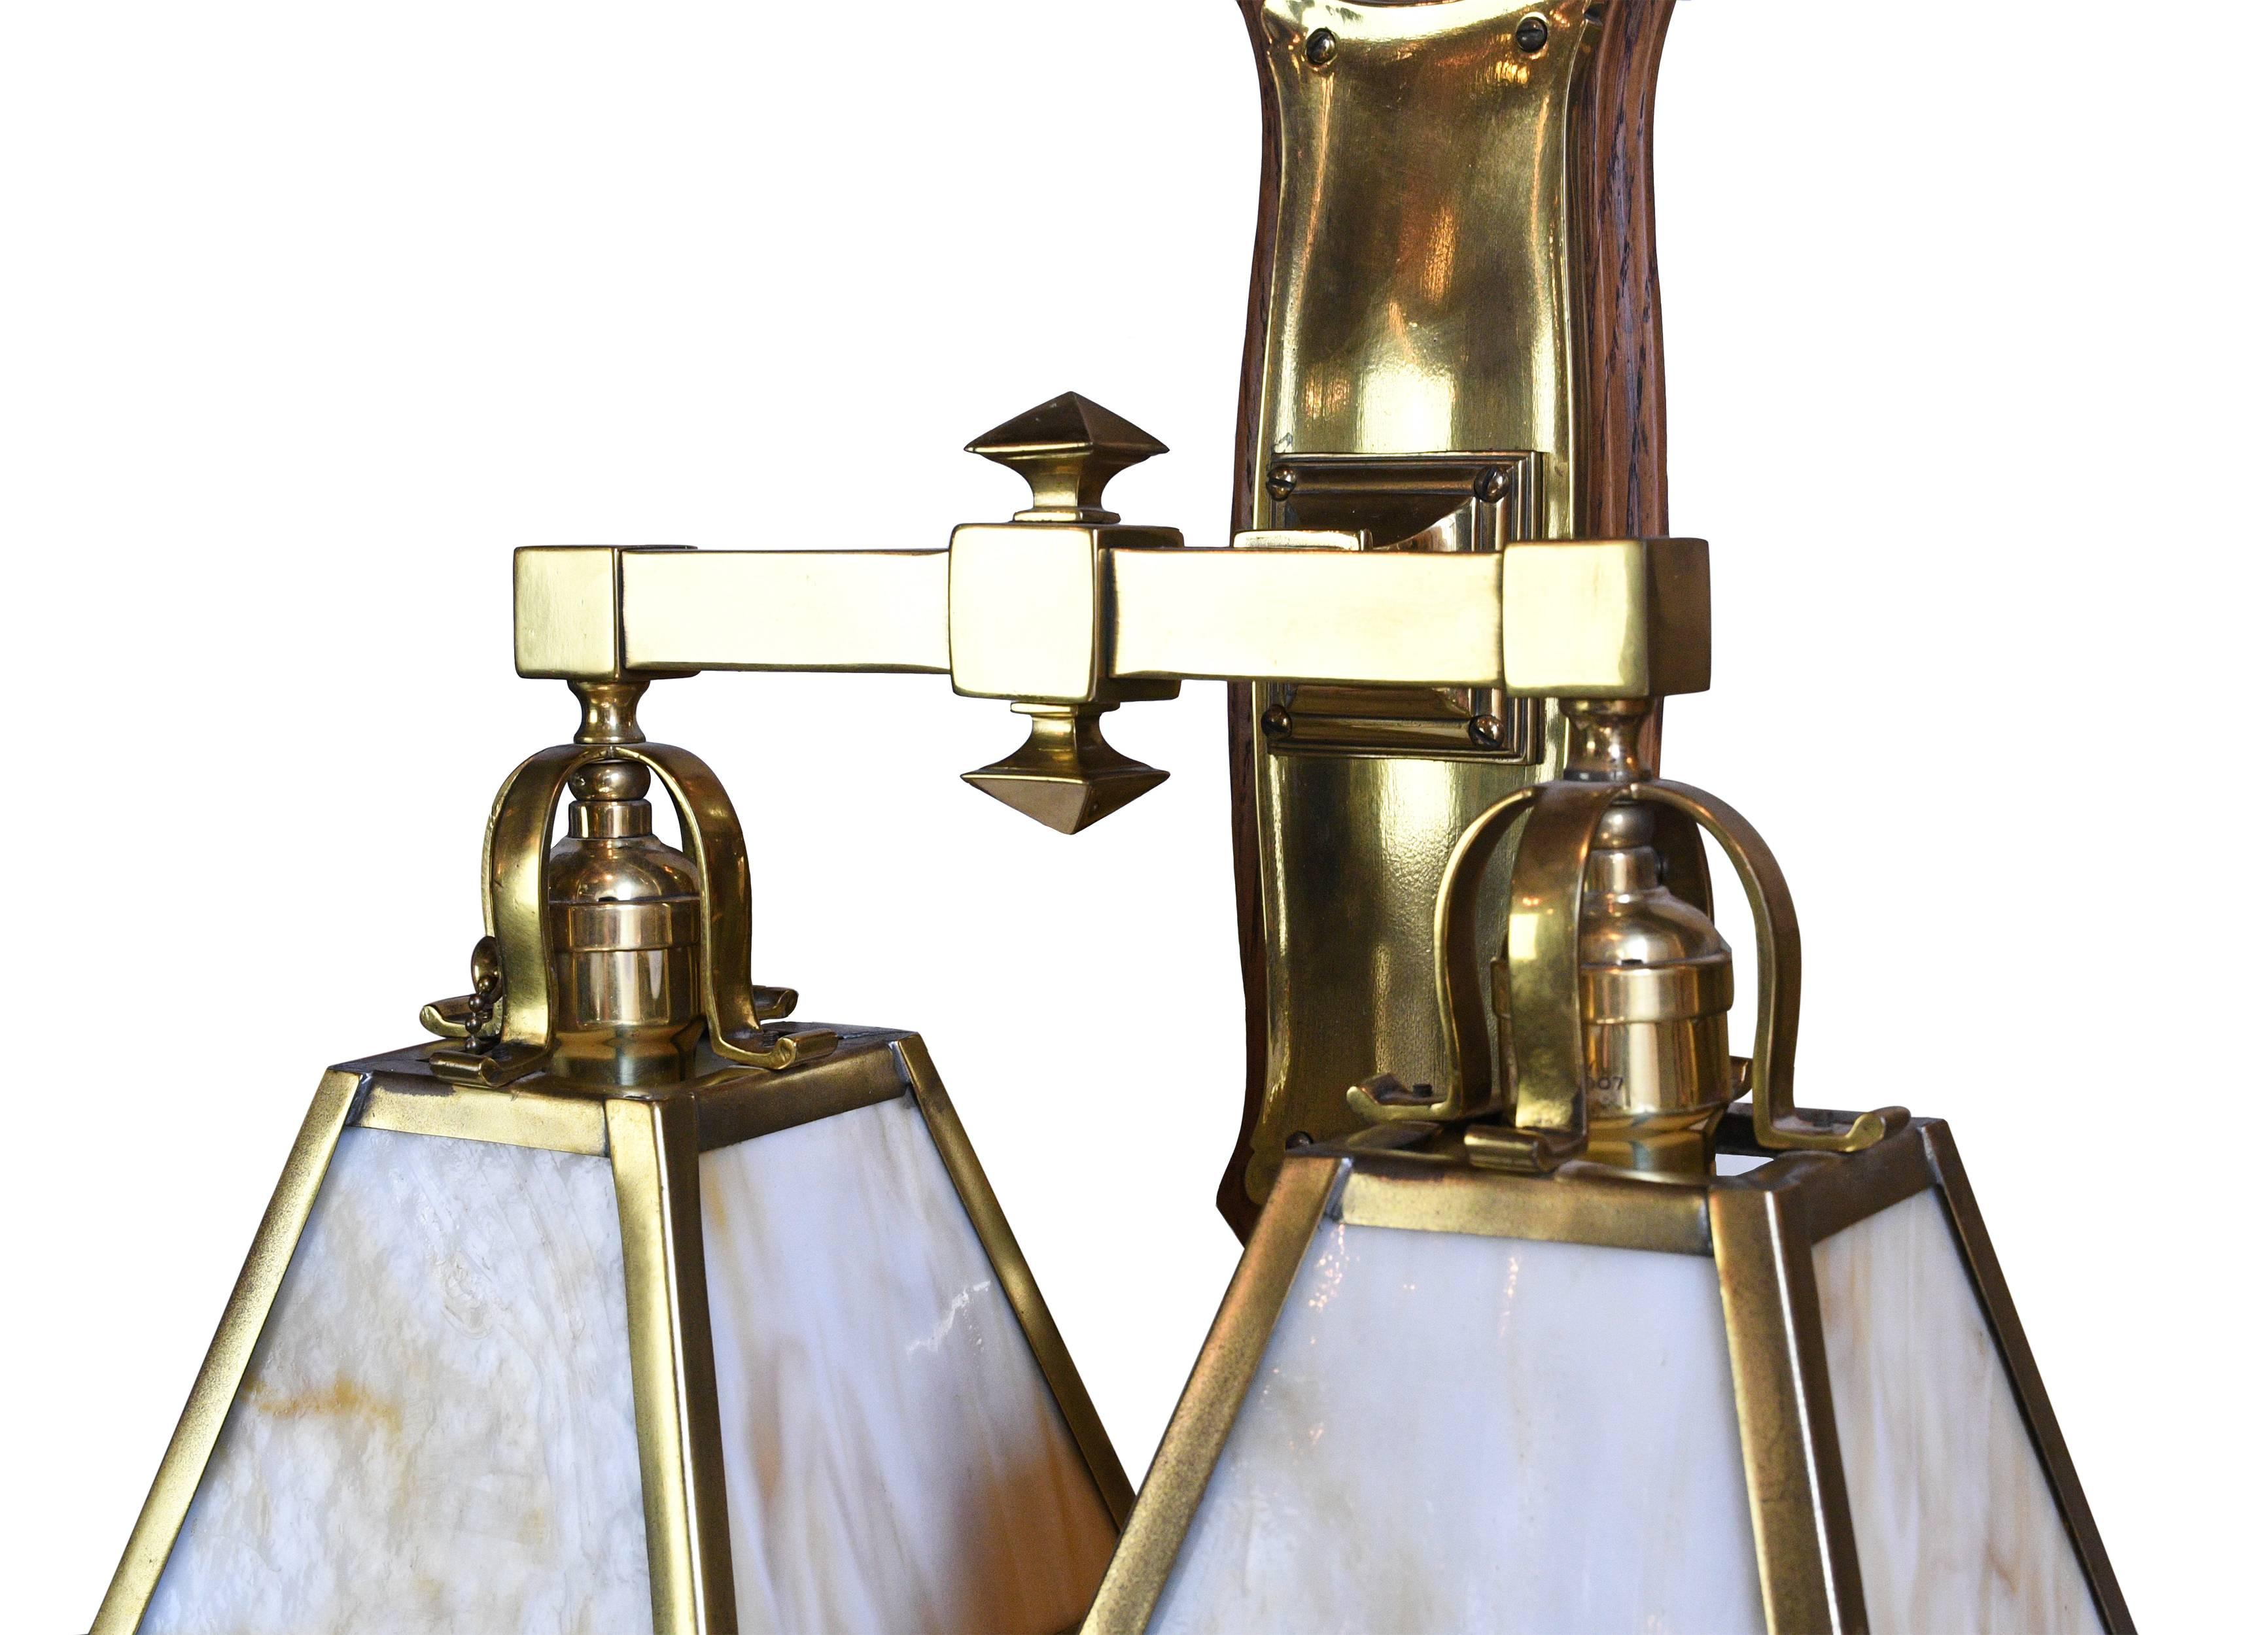 This two arm sconce is very special. It has a shiny brass body and wood back plate. The combination of bright metal and dark wood is charming and adds a lot of character to this fixture. Additionally, the glass of the shades has a rich, subtle